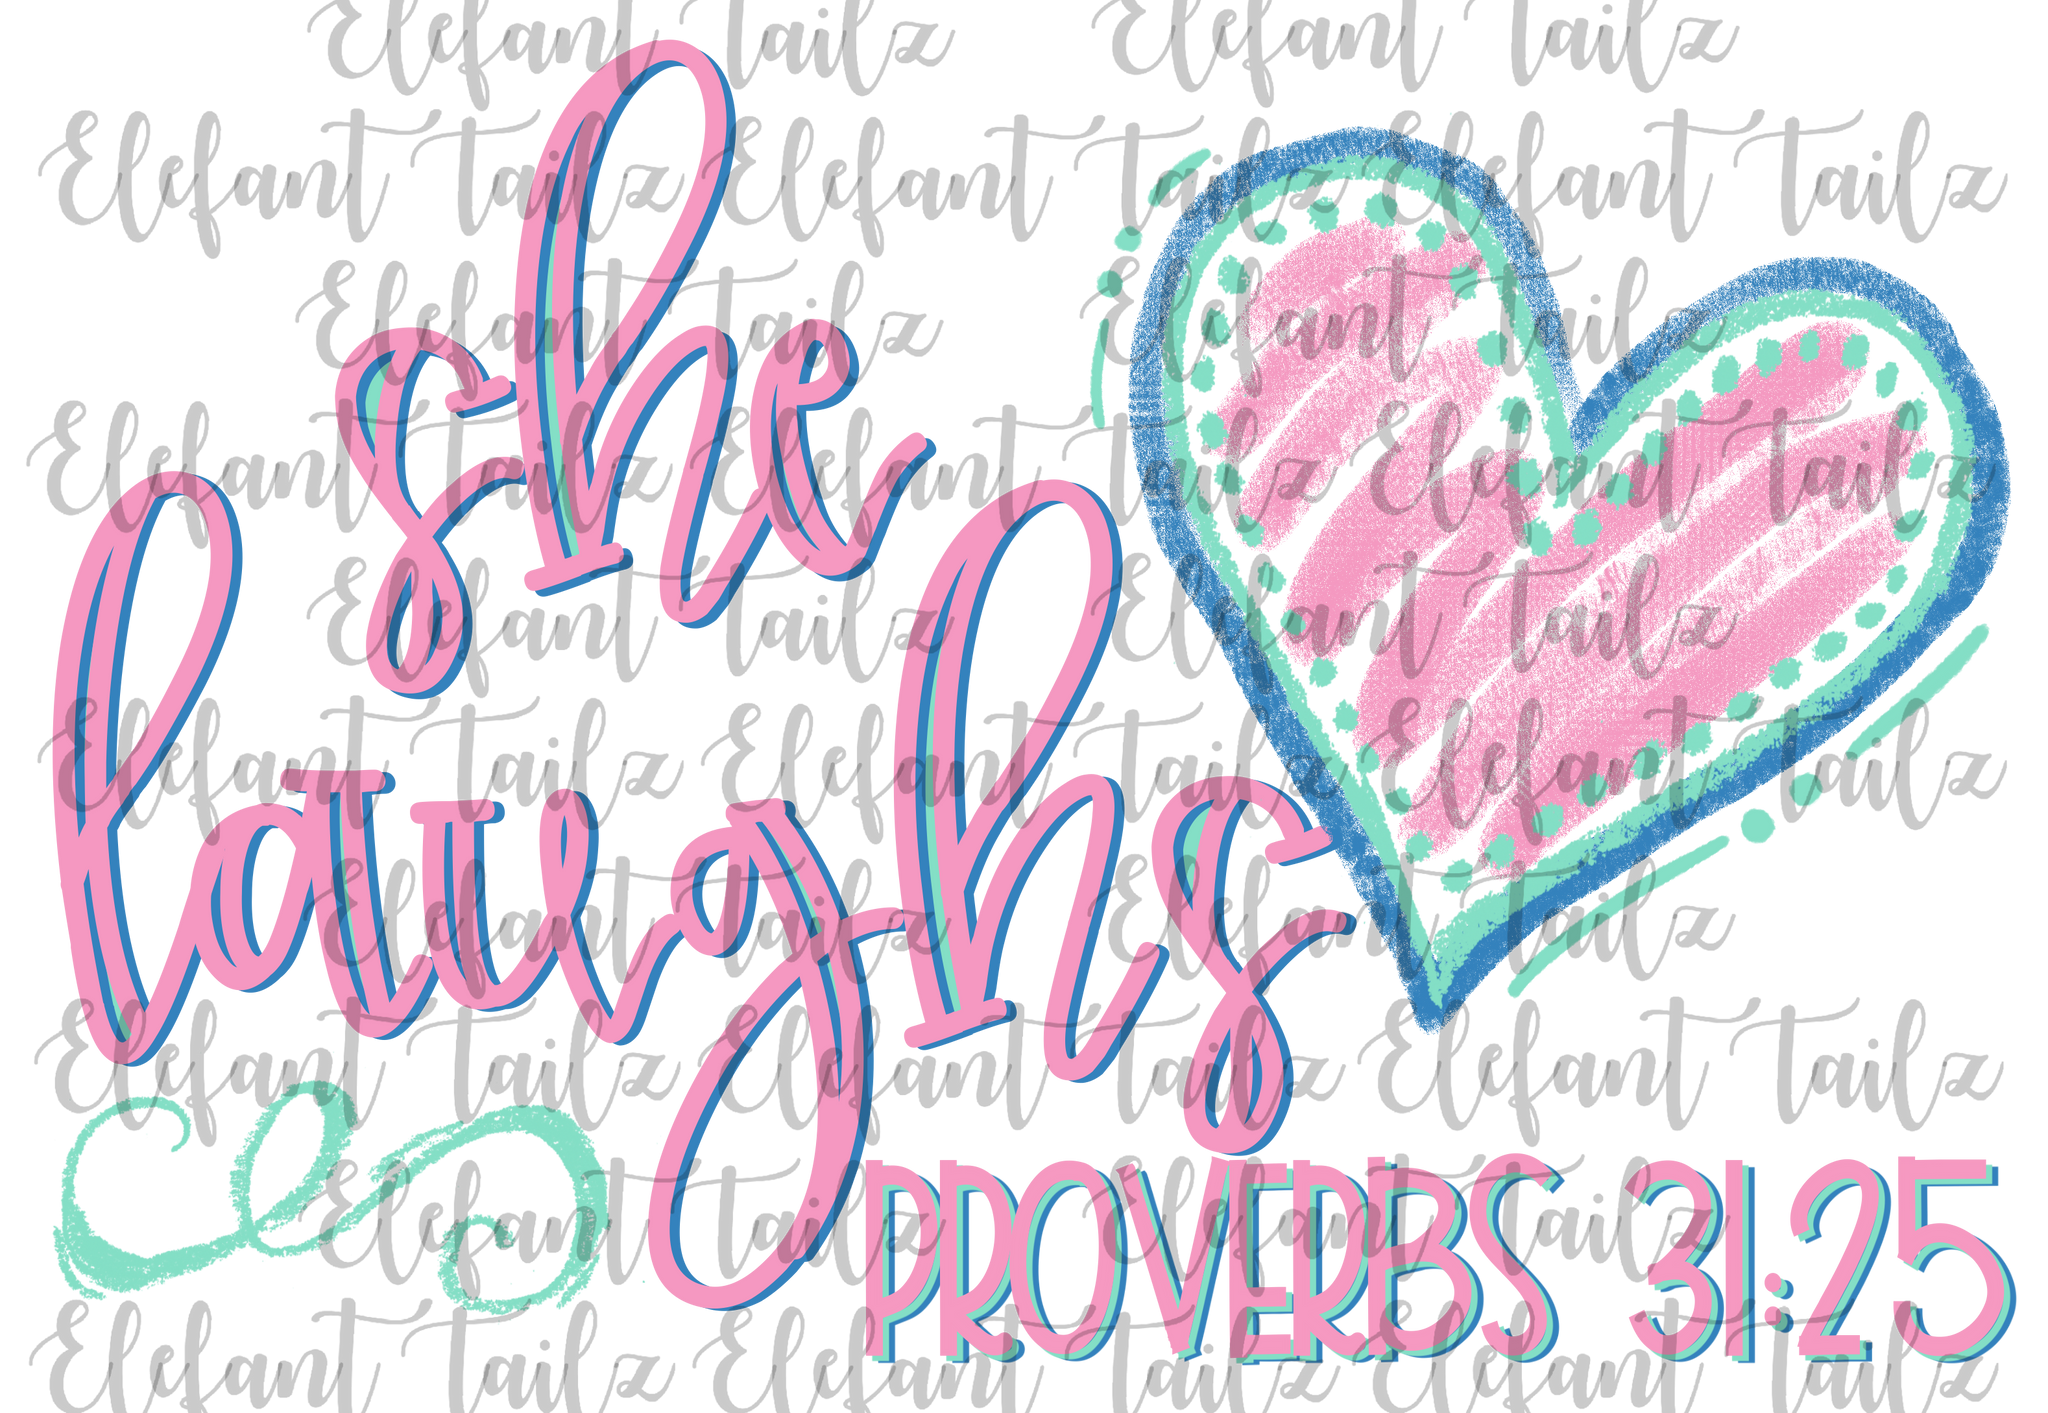 She Laughs Proverbs 31:25